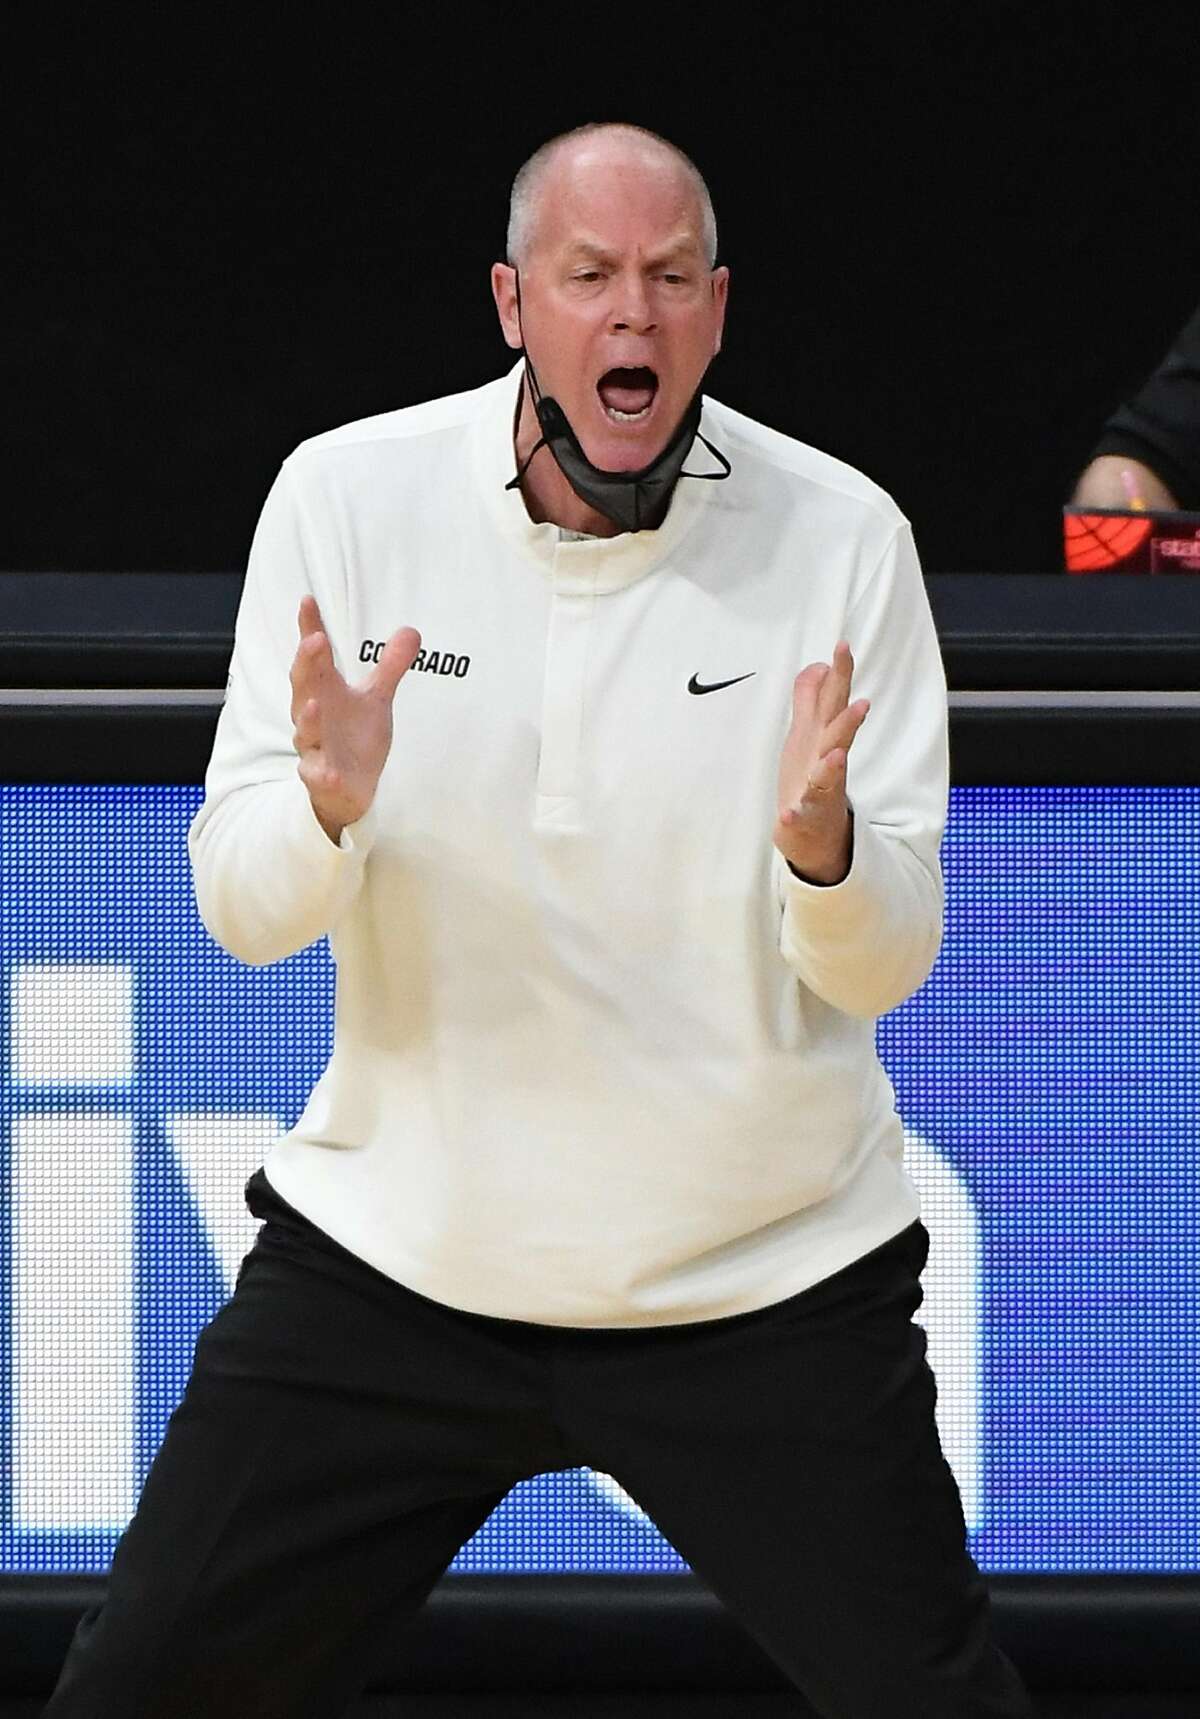 LAS VEGAS, NEVADA - MARCH 11: Head coach Tad Boyle of the Colorado Buffaloes reacts as his team takes on the California Golden Bears during the quarterfinals of the Pac-12 Conference basketball tournament on March 11, 2021 in Las Vegas, Nevada. (Photo by Ethan Miller/Getty Images)